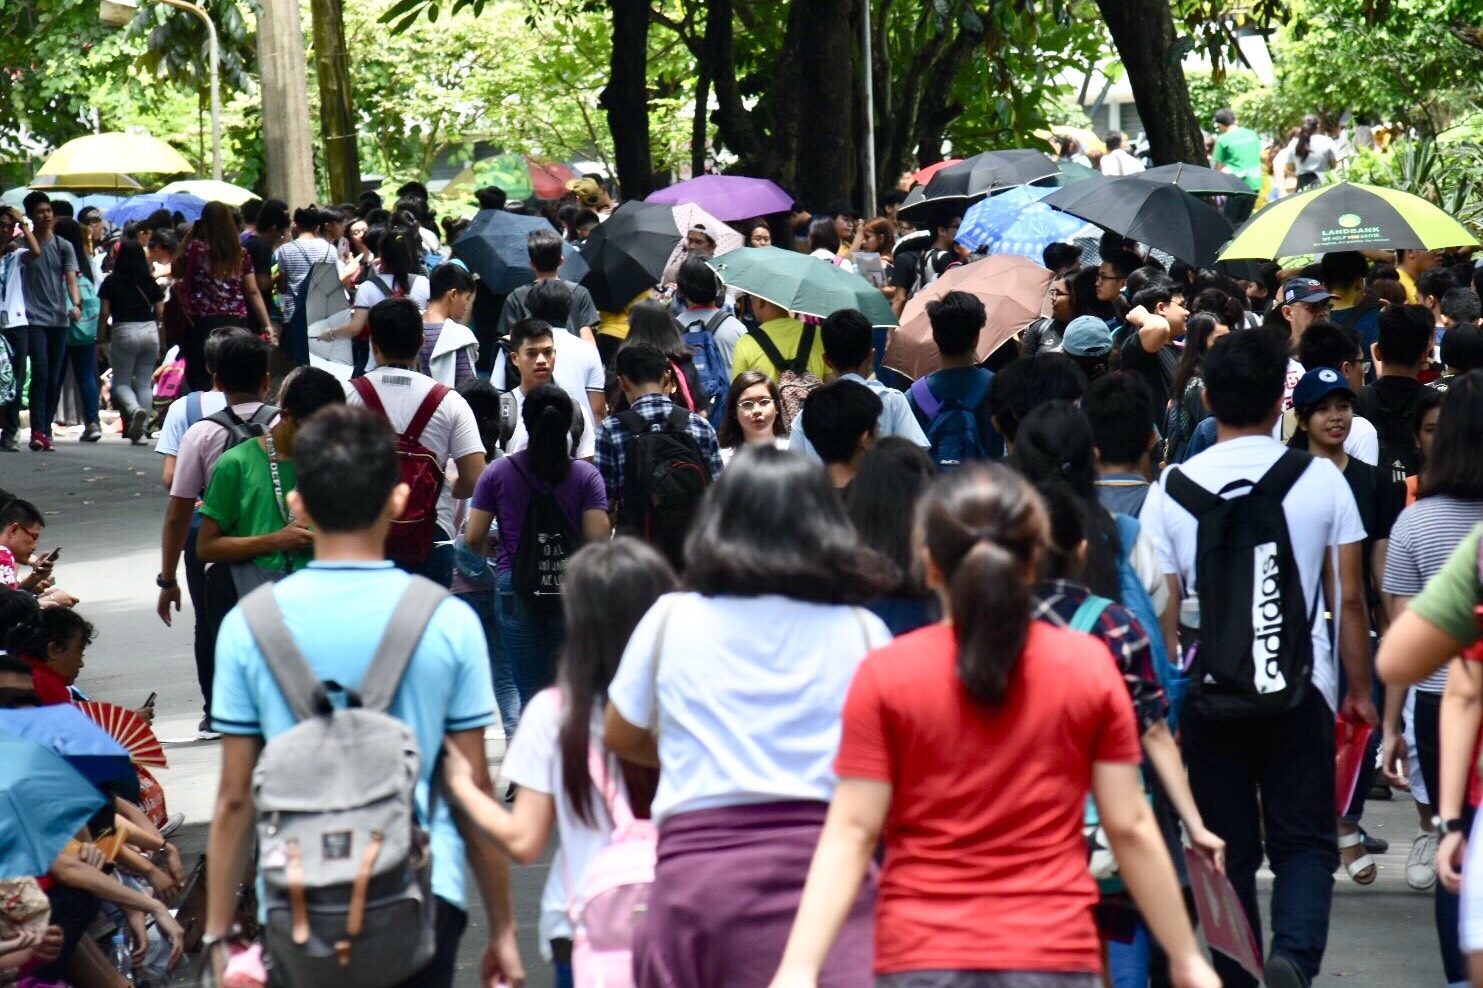 It’s UPCAT, ASHAPE weekend! Expect heavy traffic in Diliman-Katipunan area